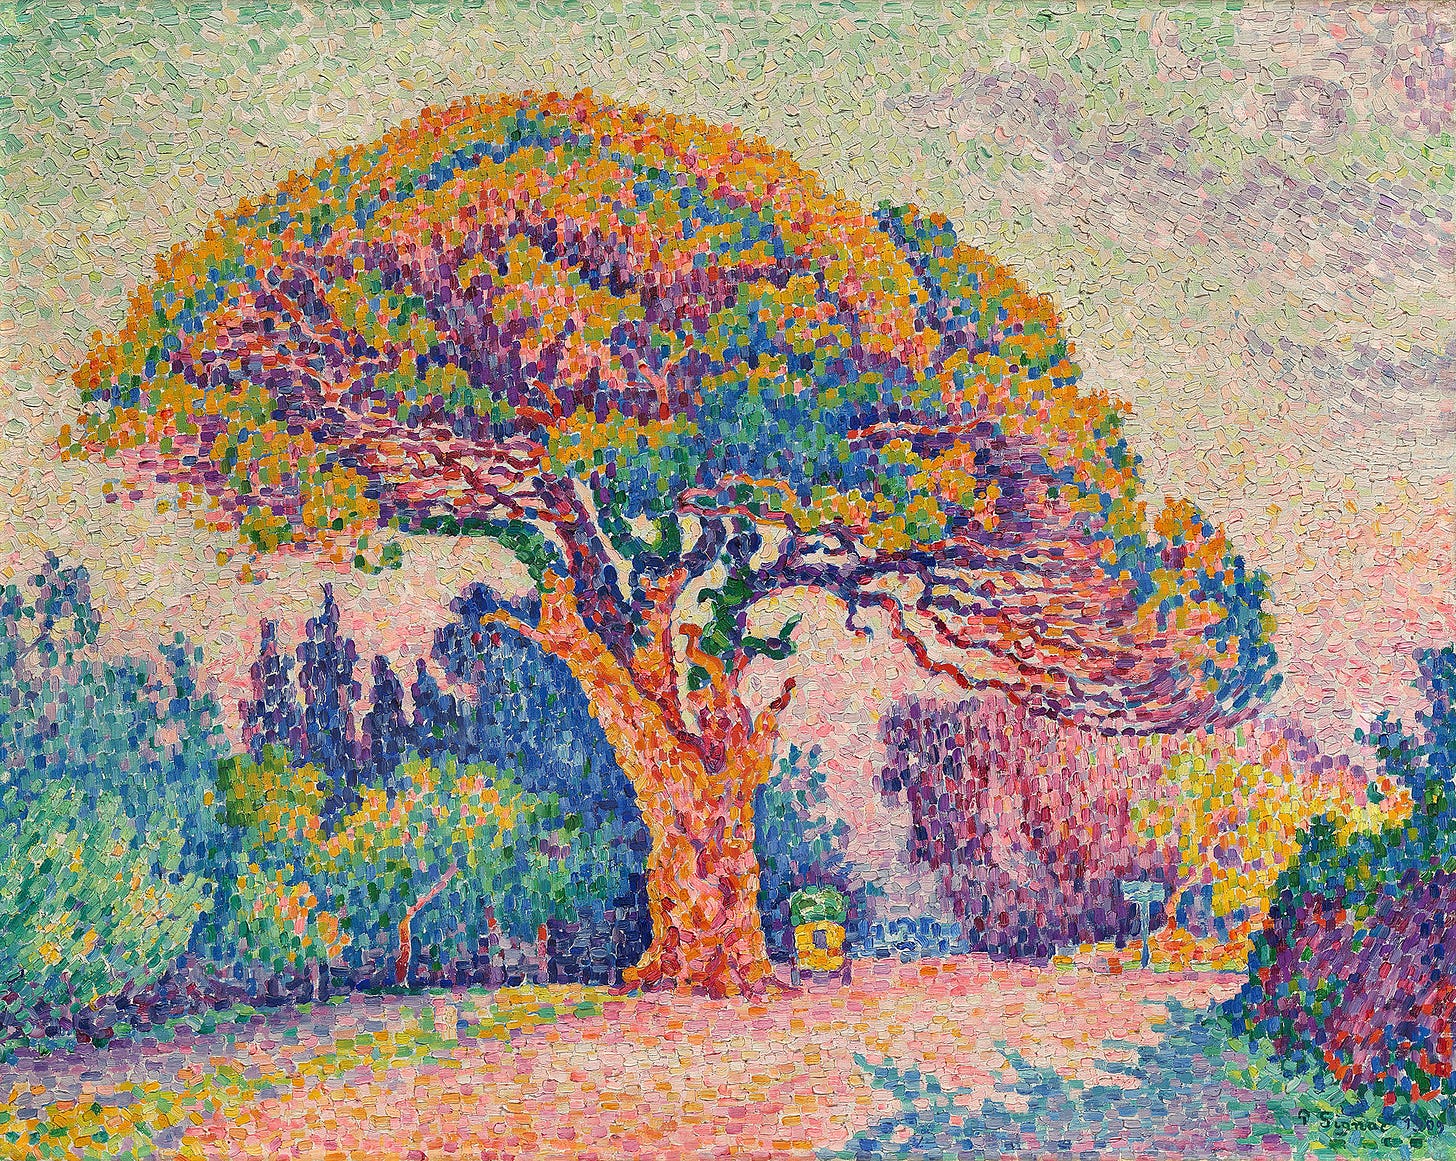 Oil painting depicting a forest landscape and large tree at its center, all portrayed with vivid, bright combinations of color